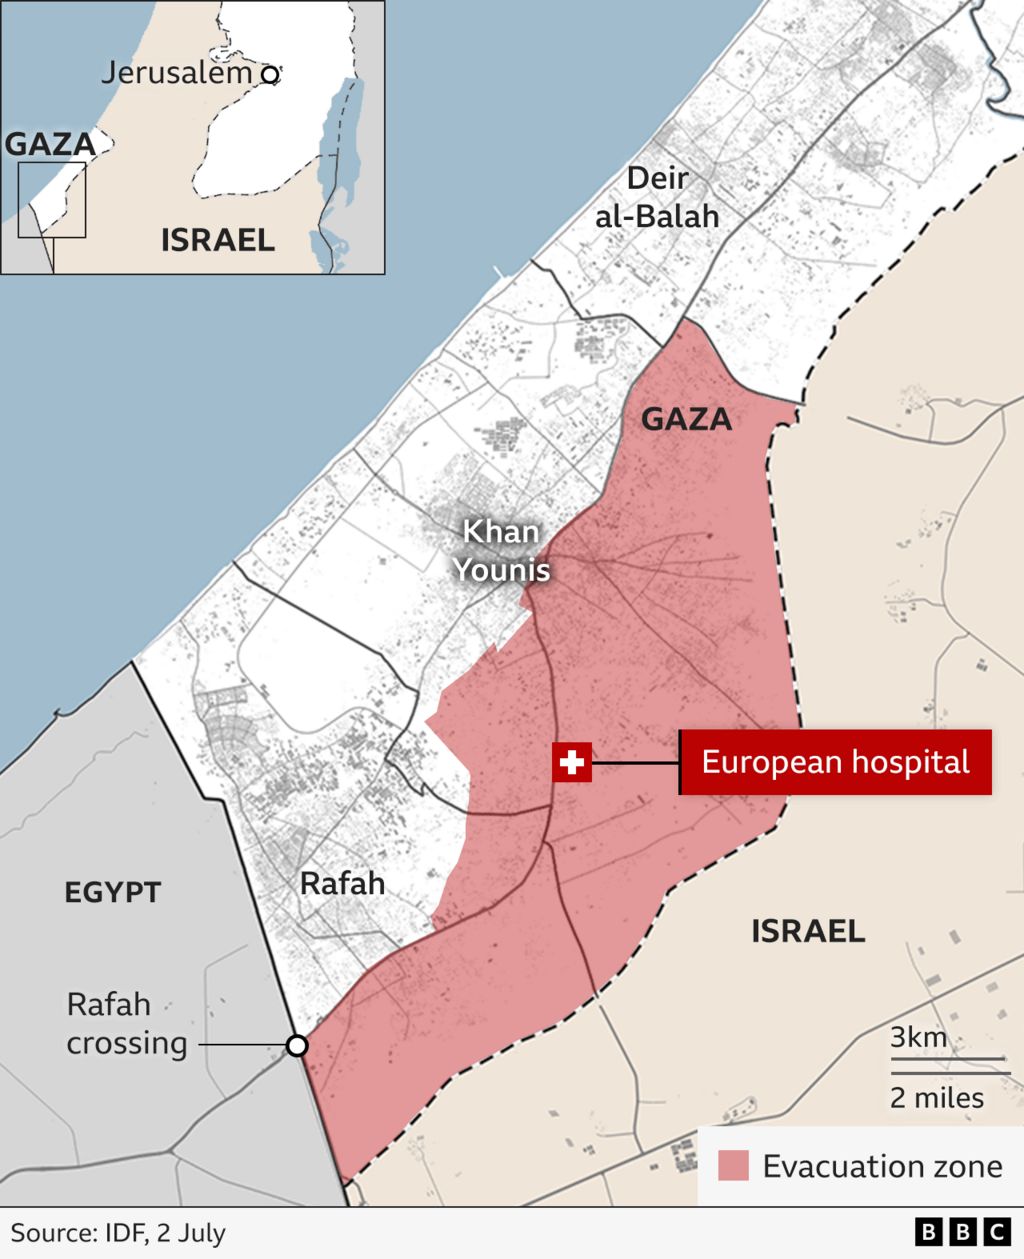 map showing southern gaza including the evacuation zone and the European hospital